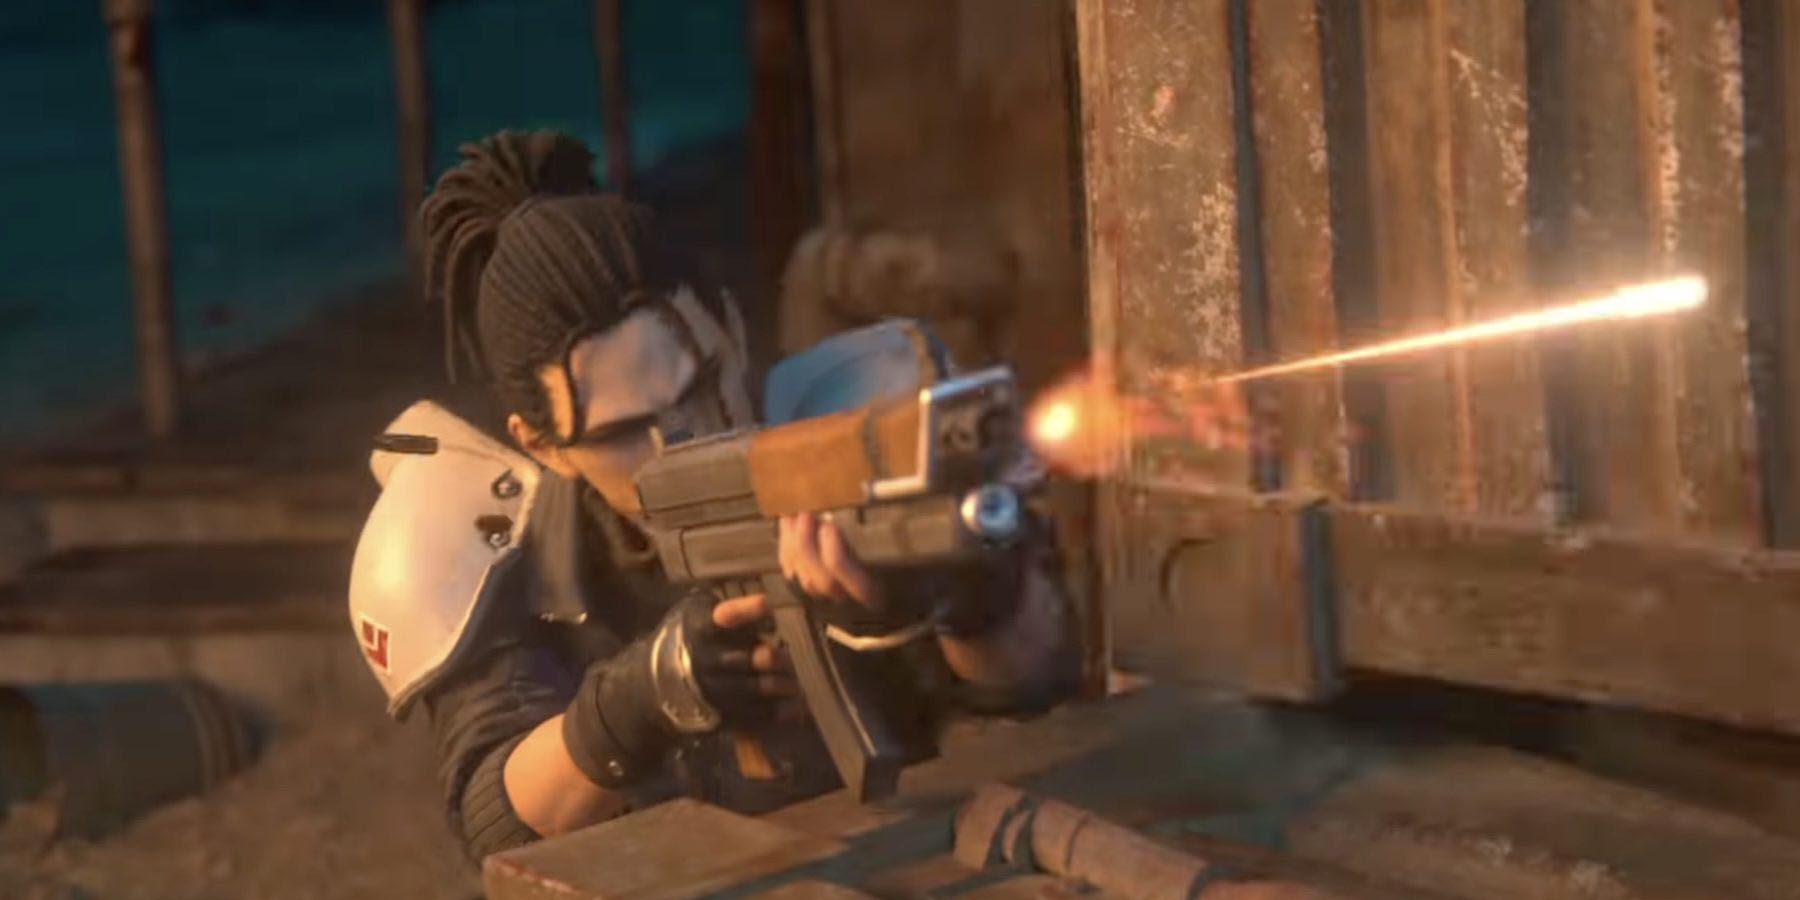 Player shooting a weapon